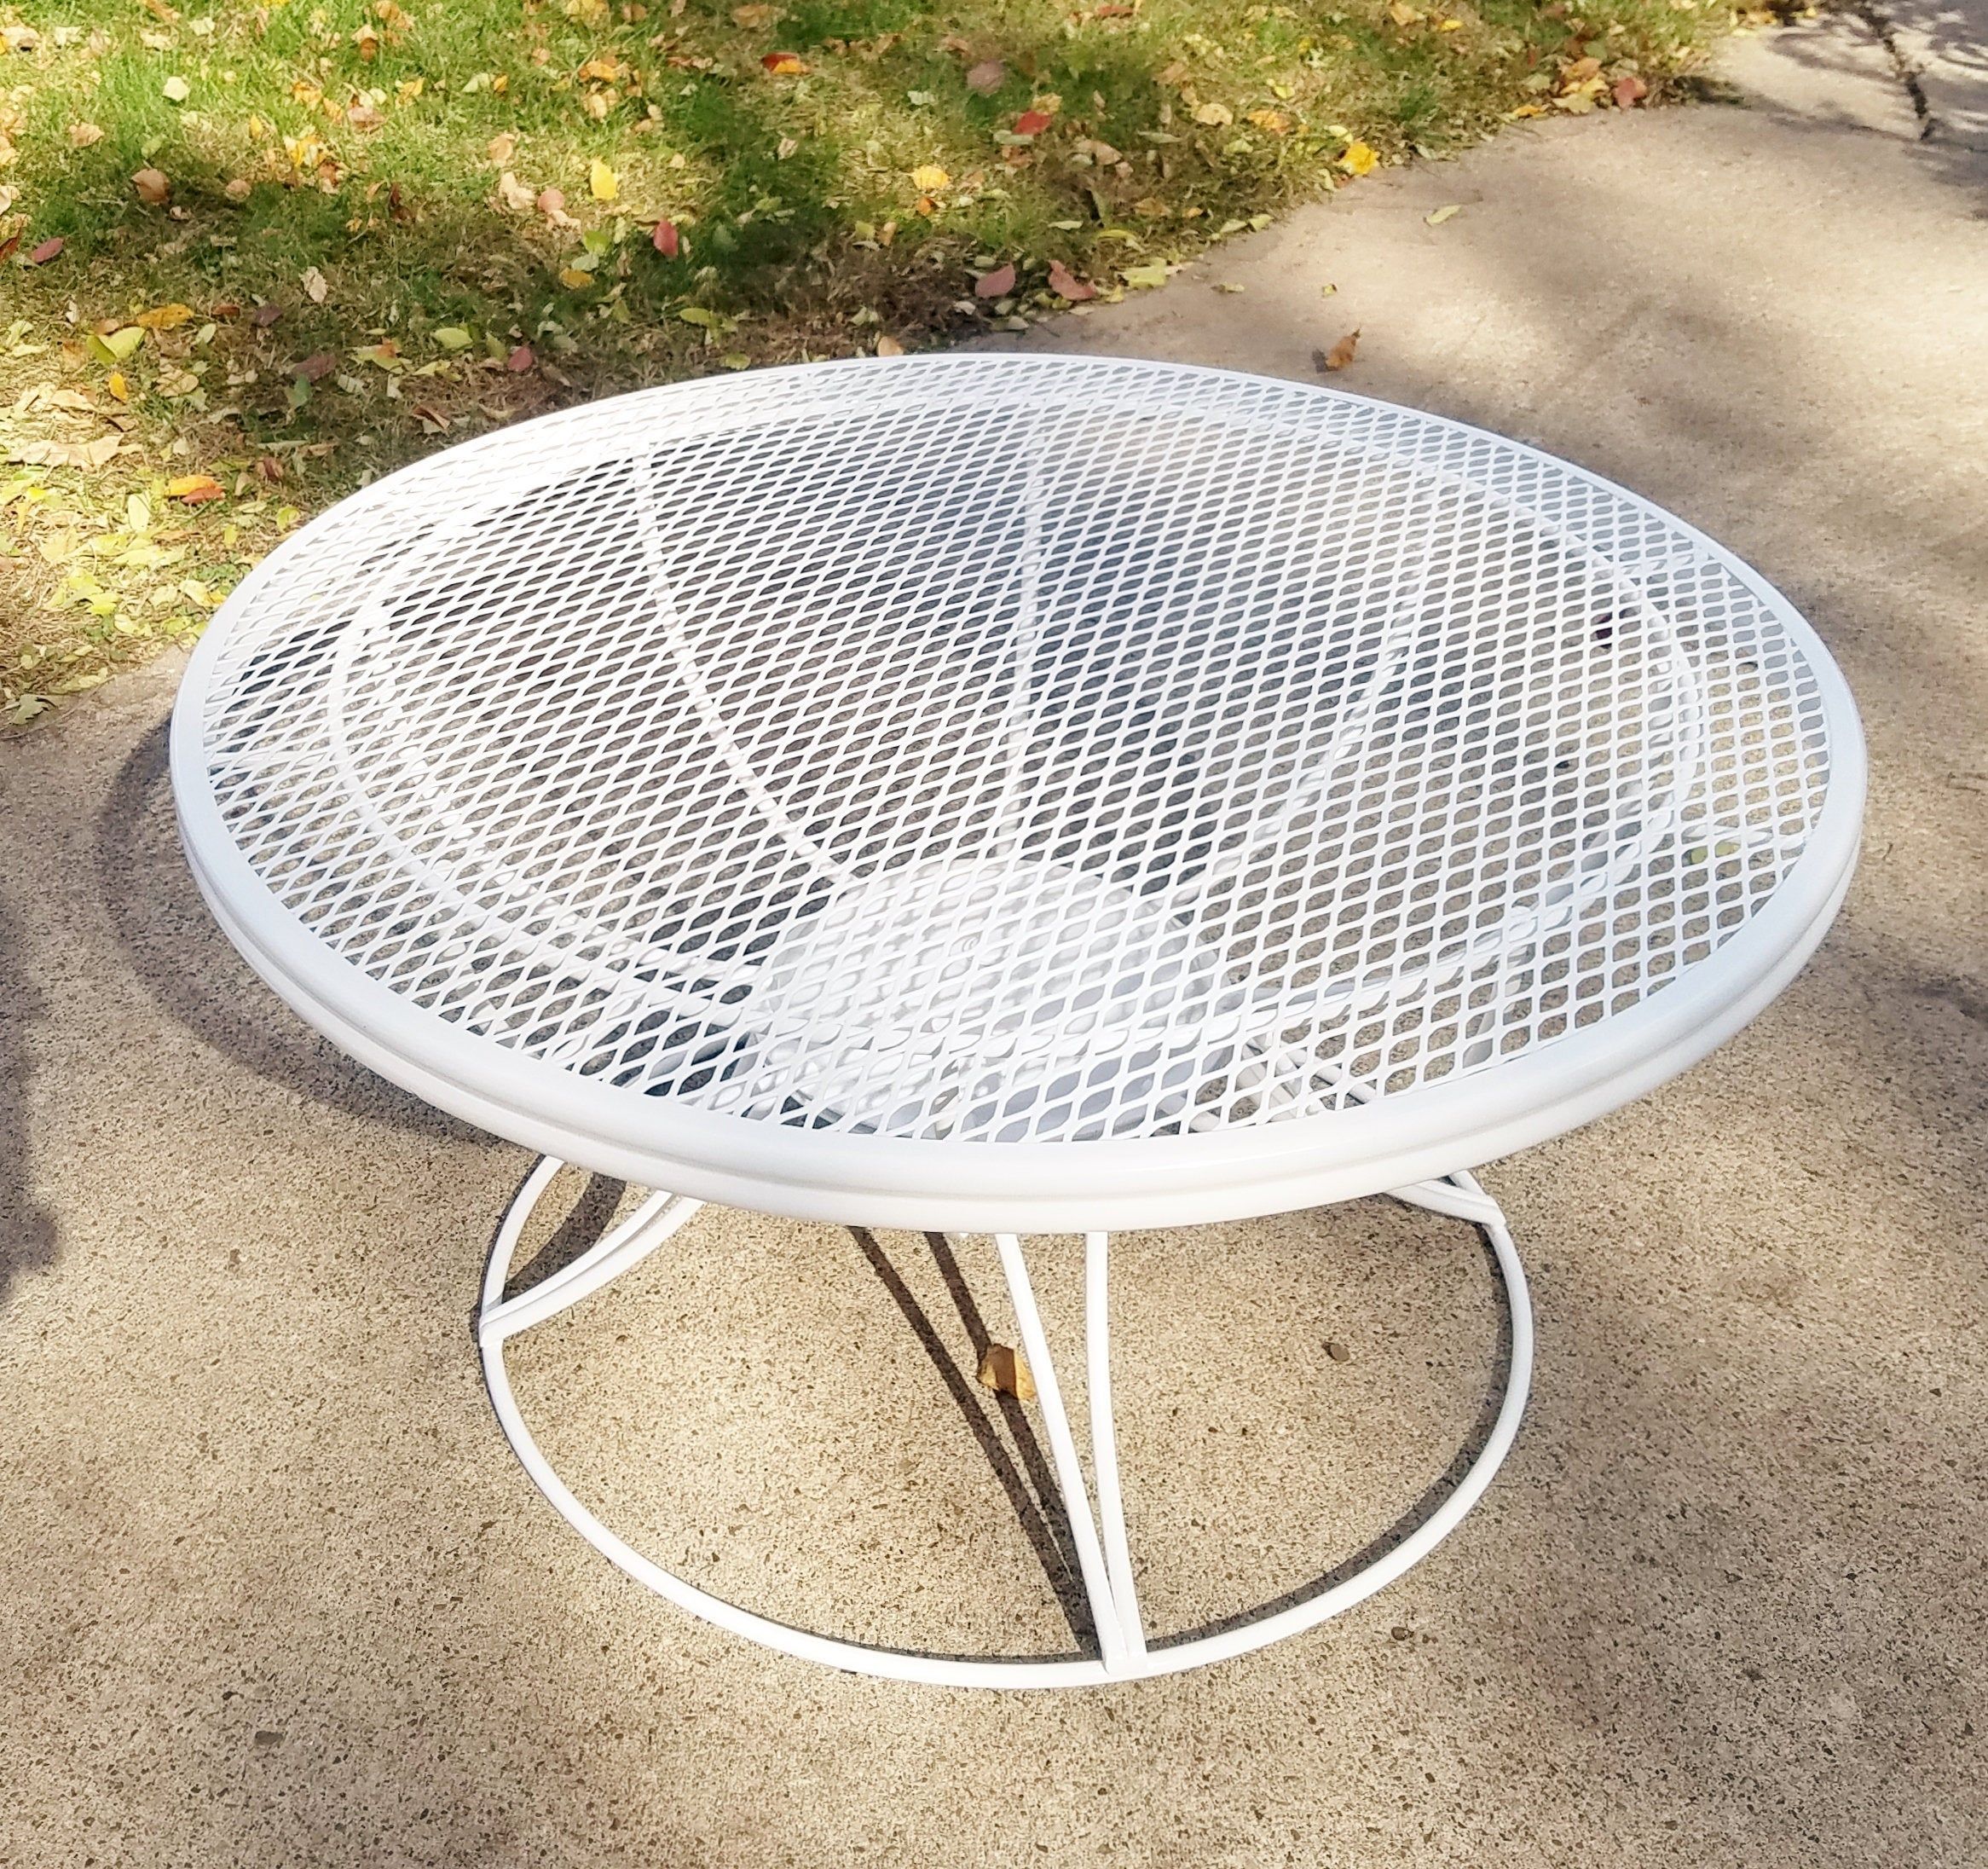 60's Homecrest Wire Table Eames Era Round Coffee Table | Etsy | Metal With Regard To Round Steel Patio Coffee Tables (View 9 of 20)